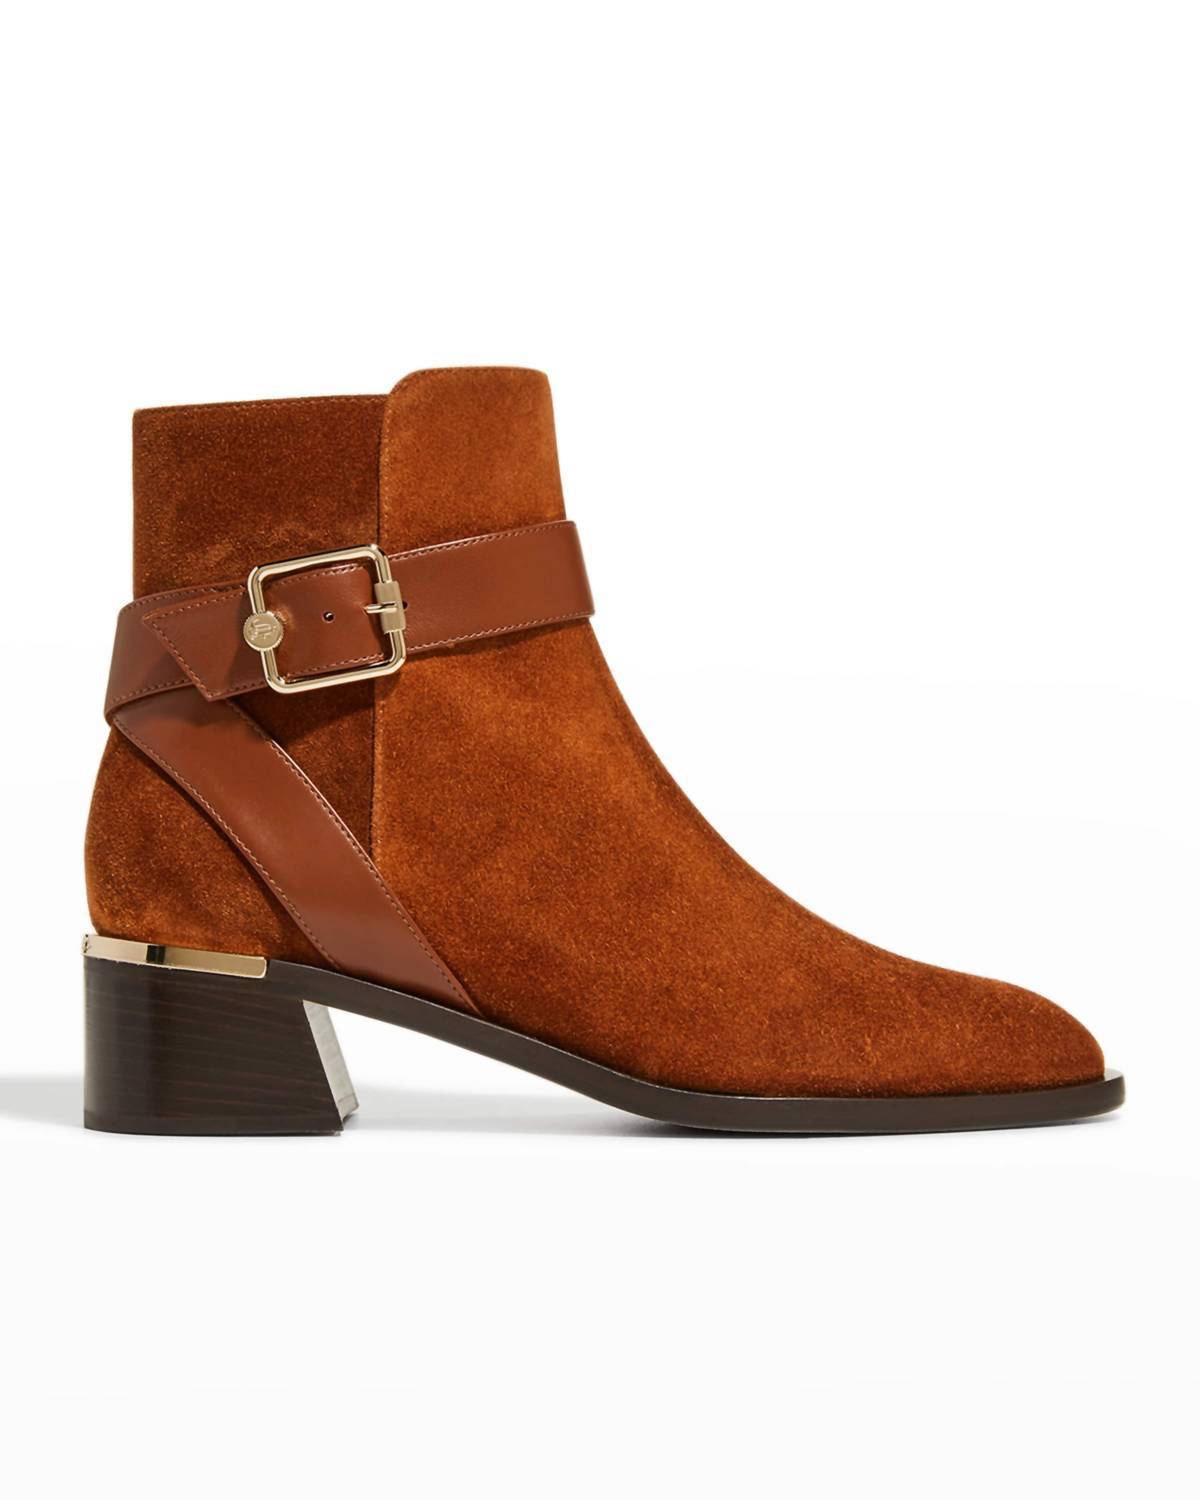 Primary image for Clarice suede buckle ankle boot